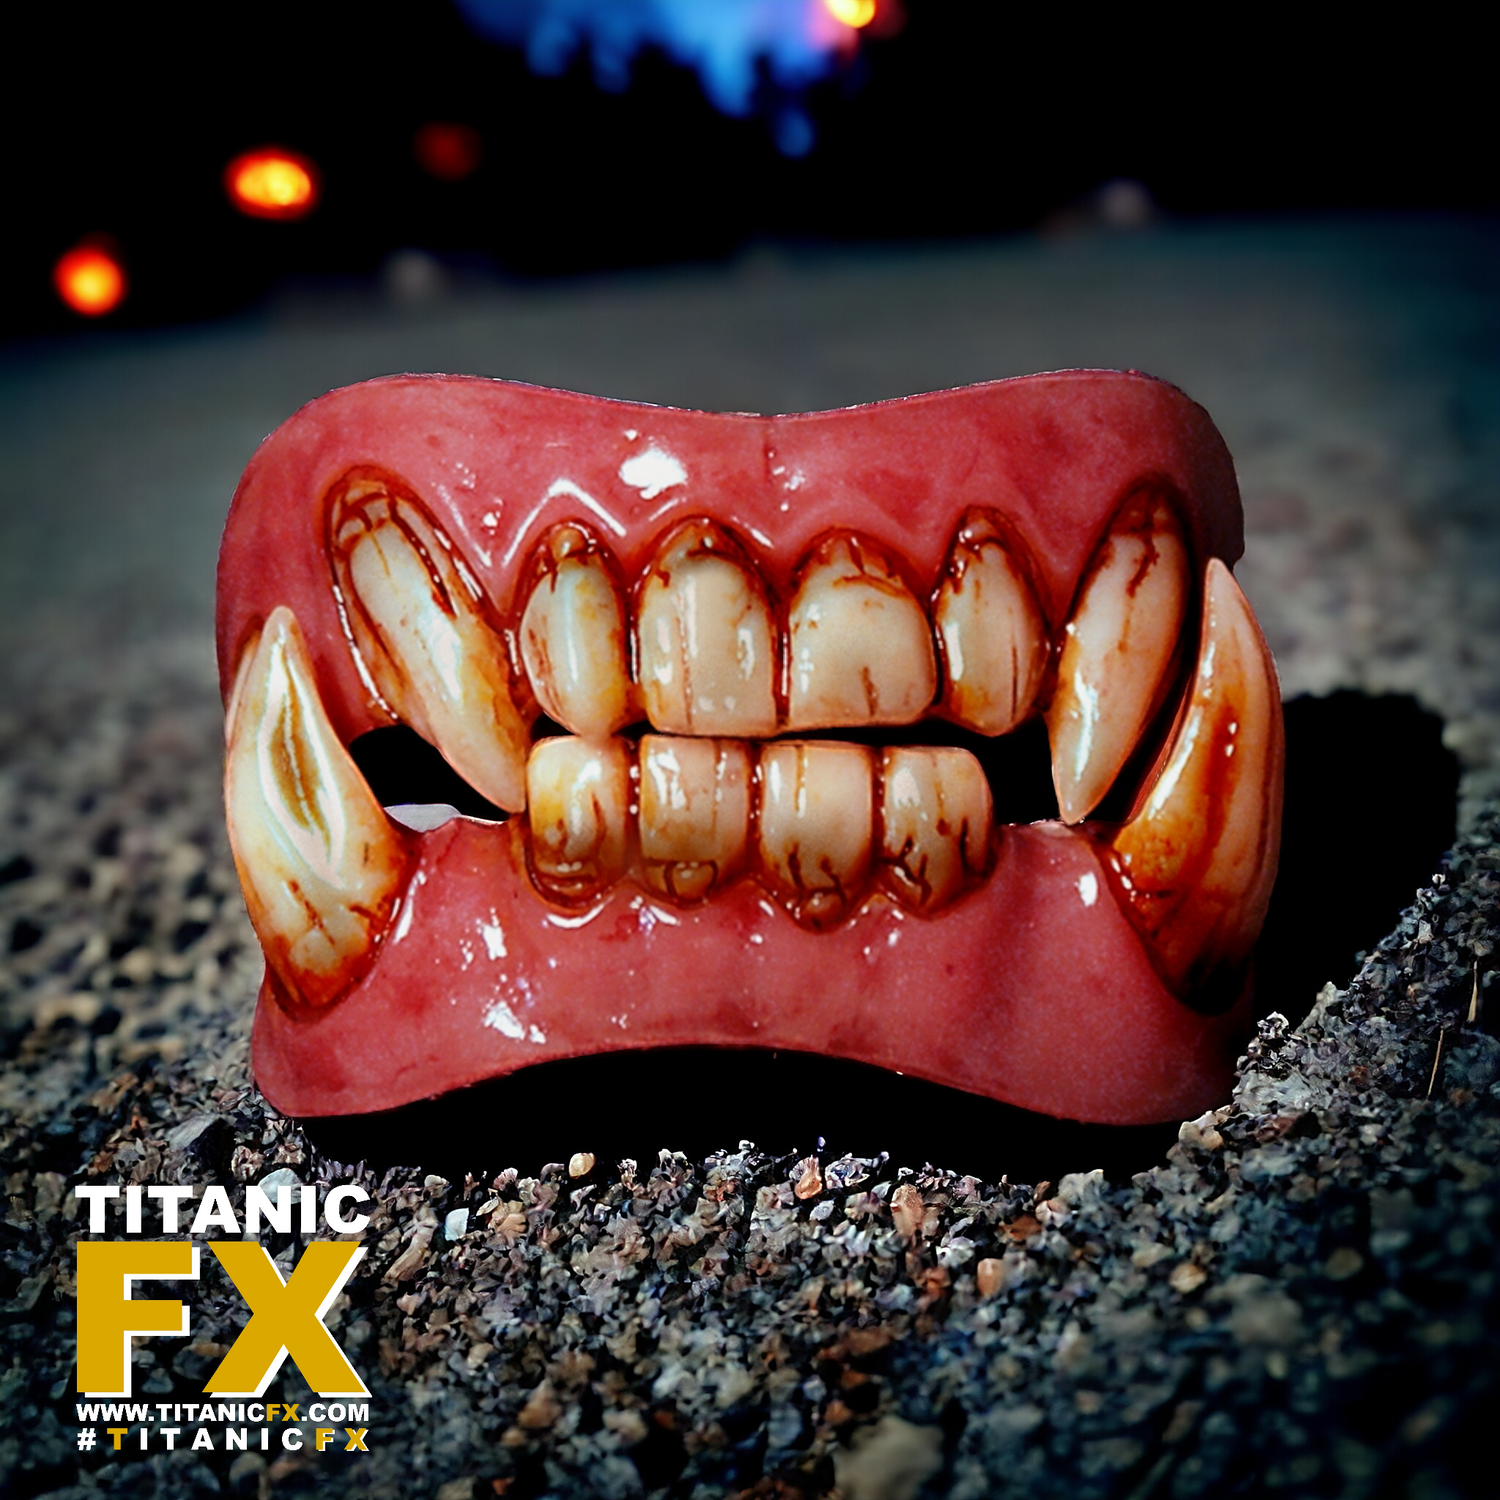 Dental Distortions | 'Orc' FX Fangs